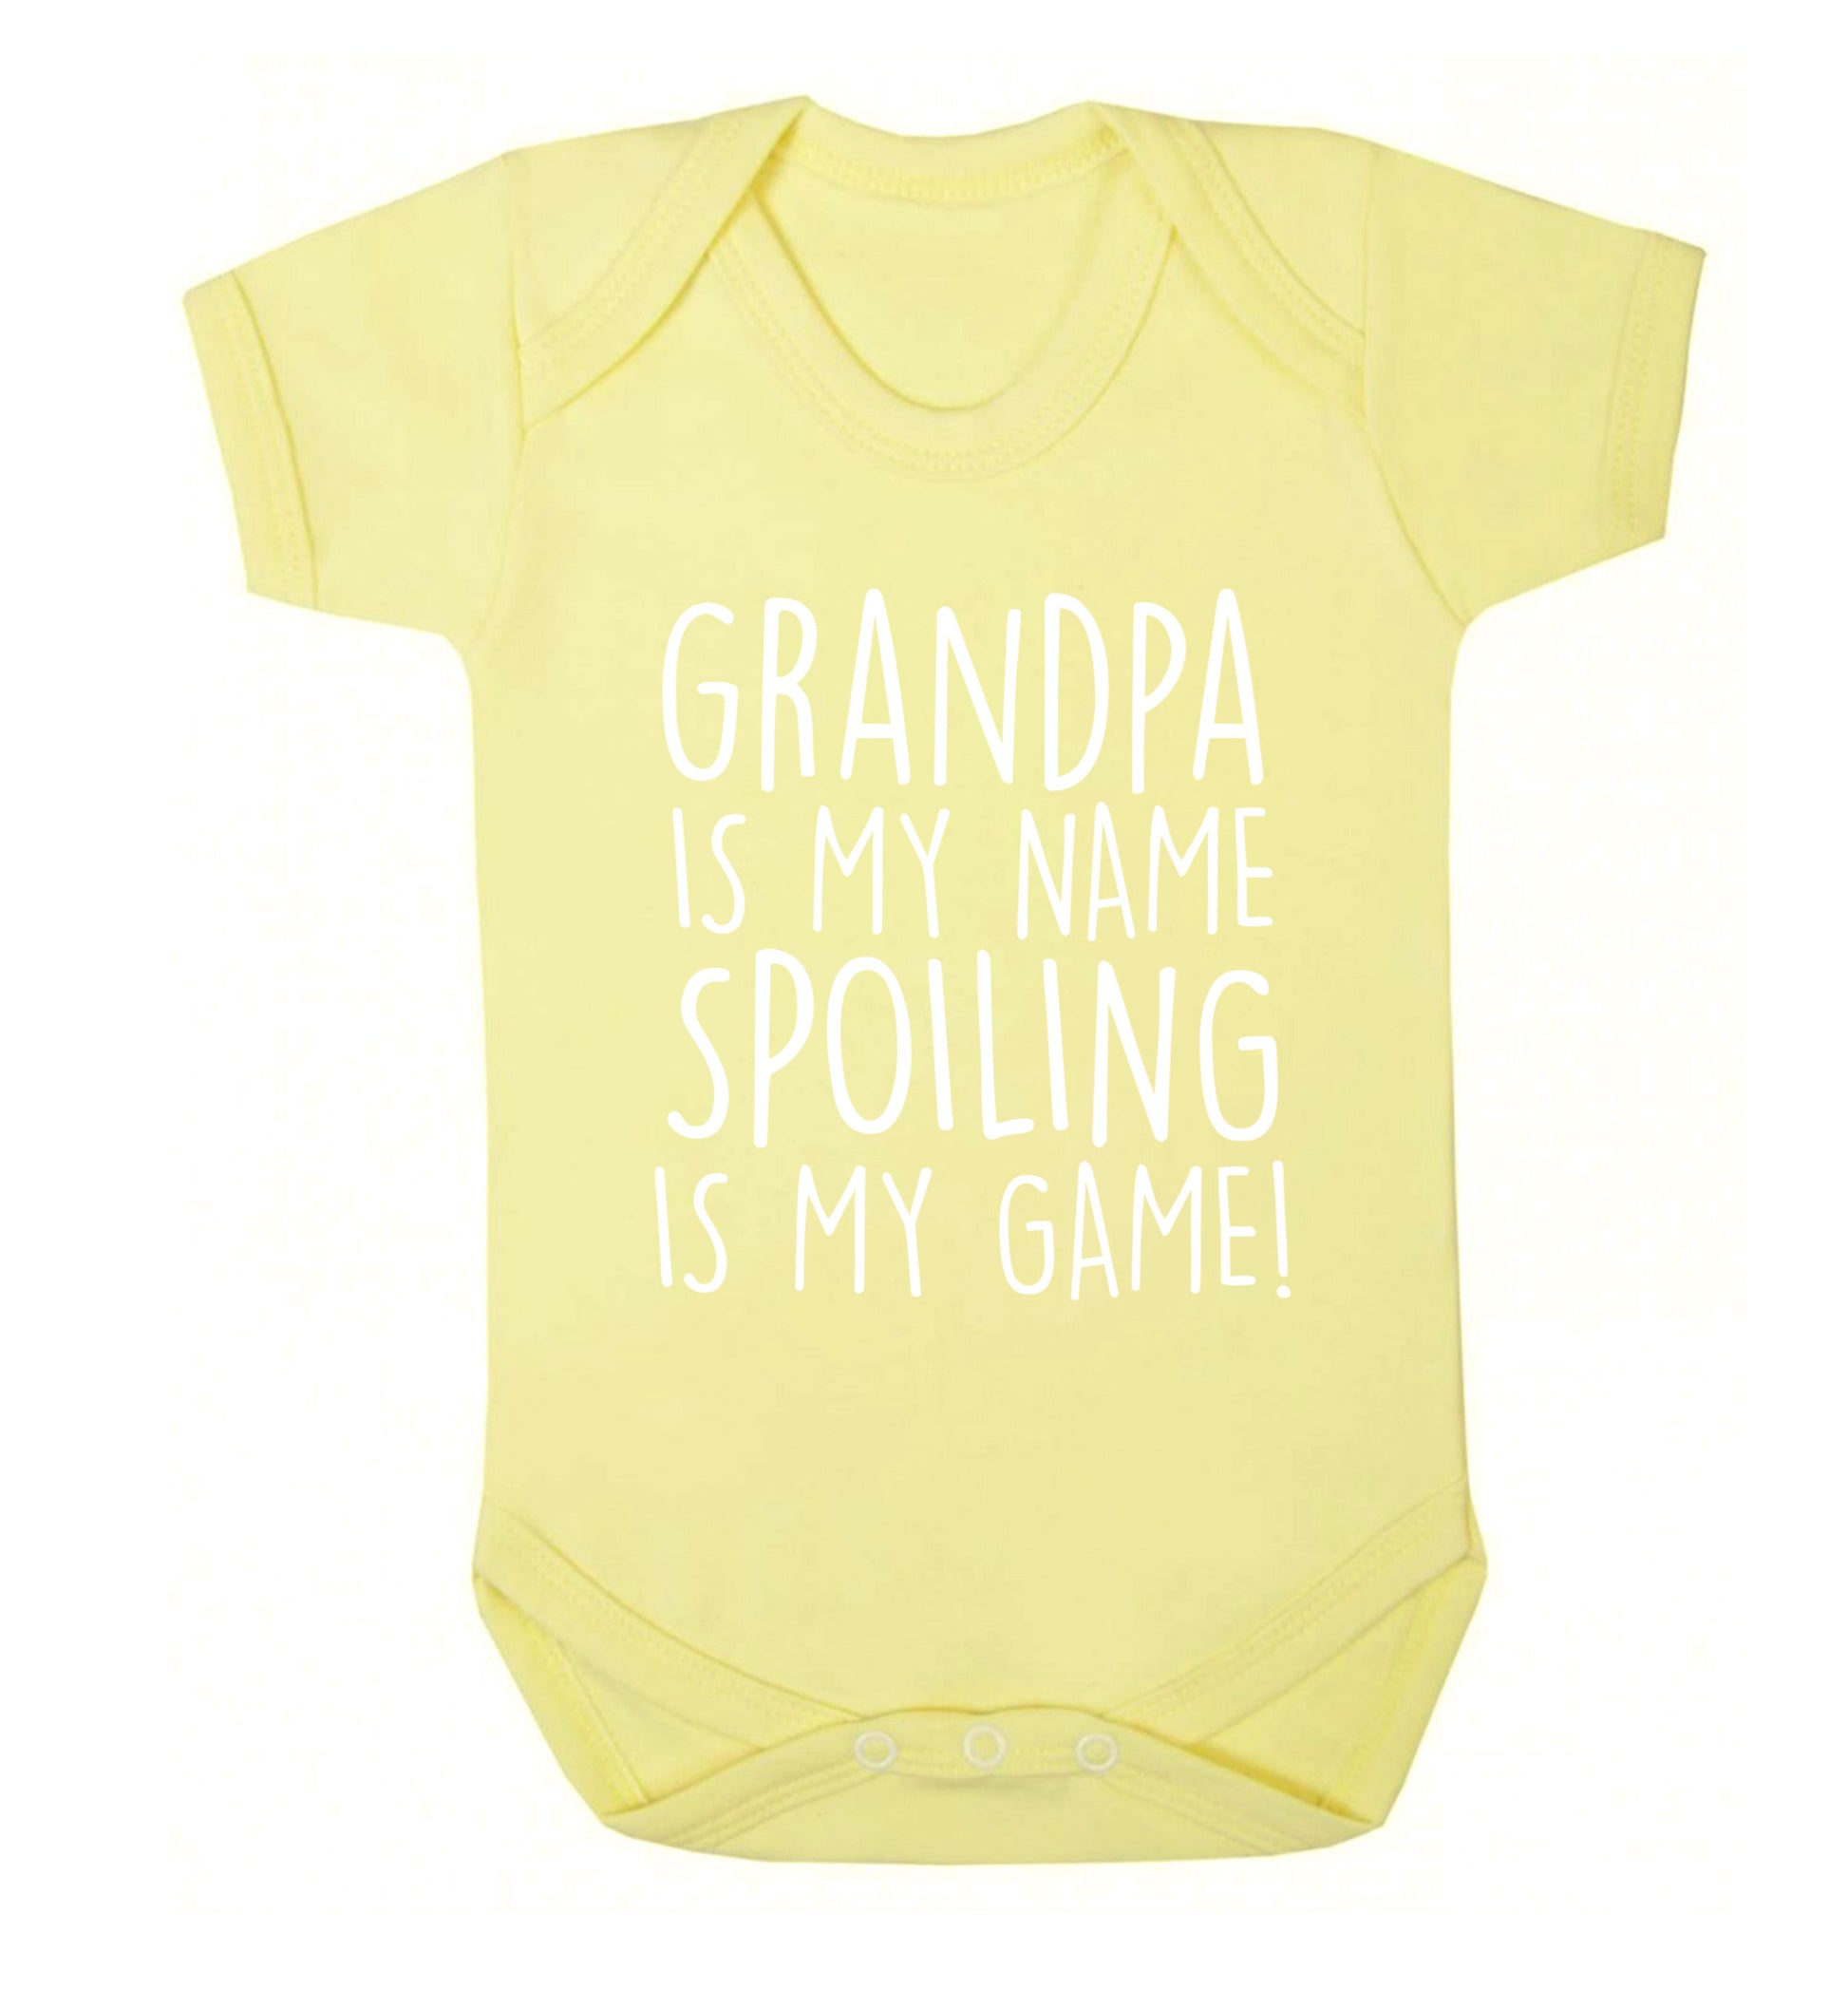 Grandpa is my name, spoiling is my game Baby Vest pale yellow 18-24 months